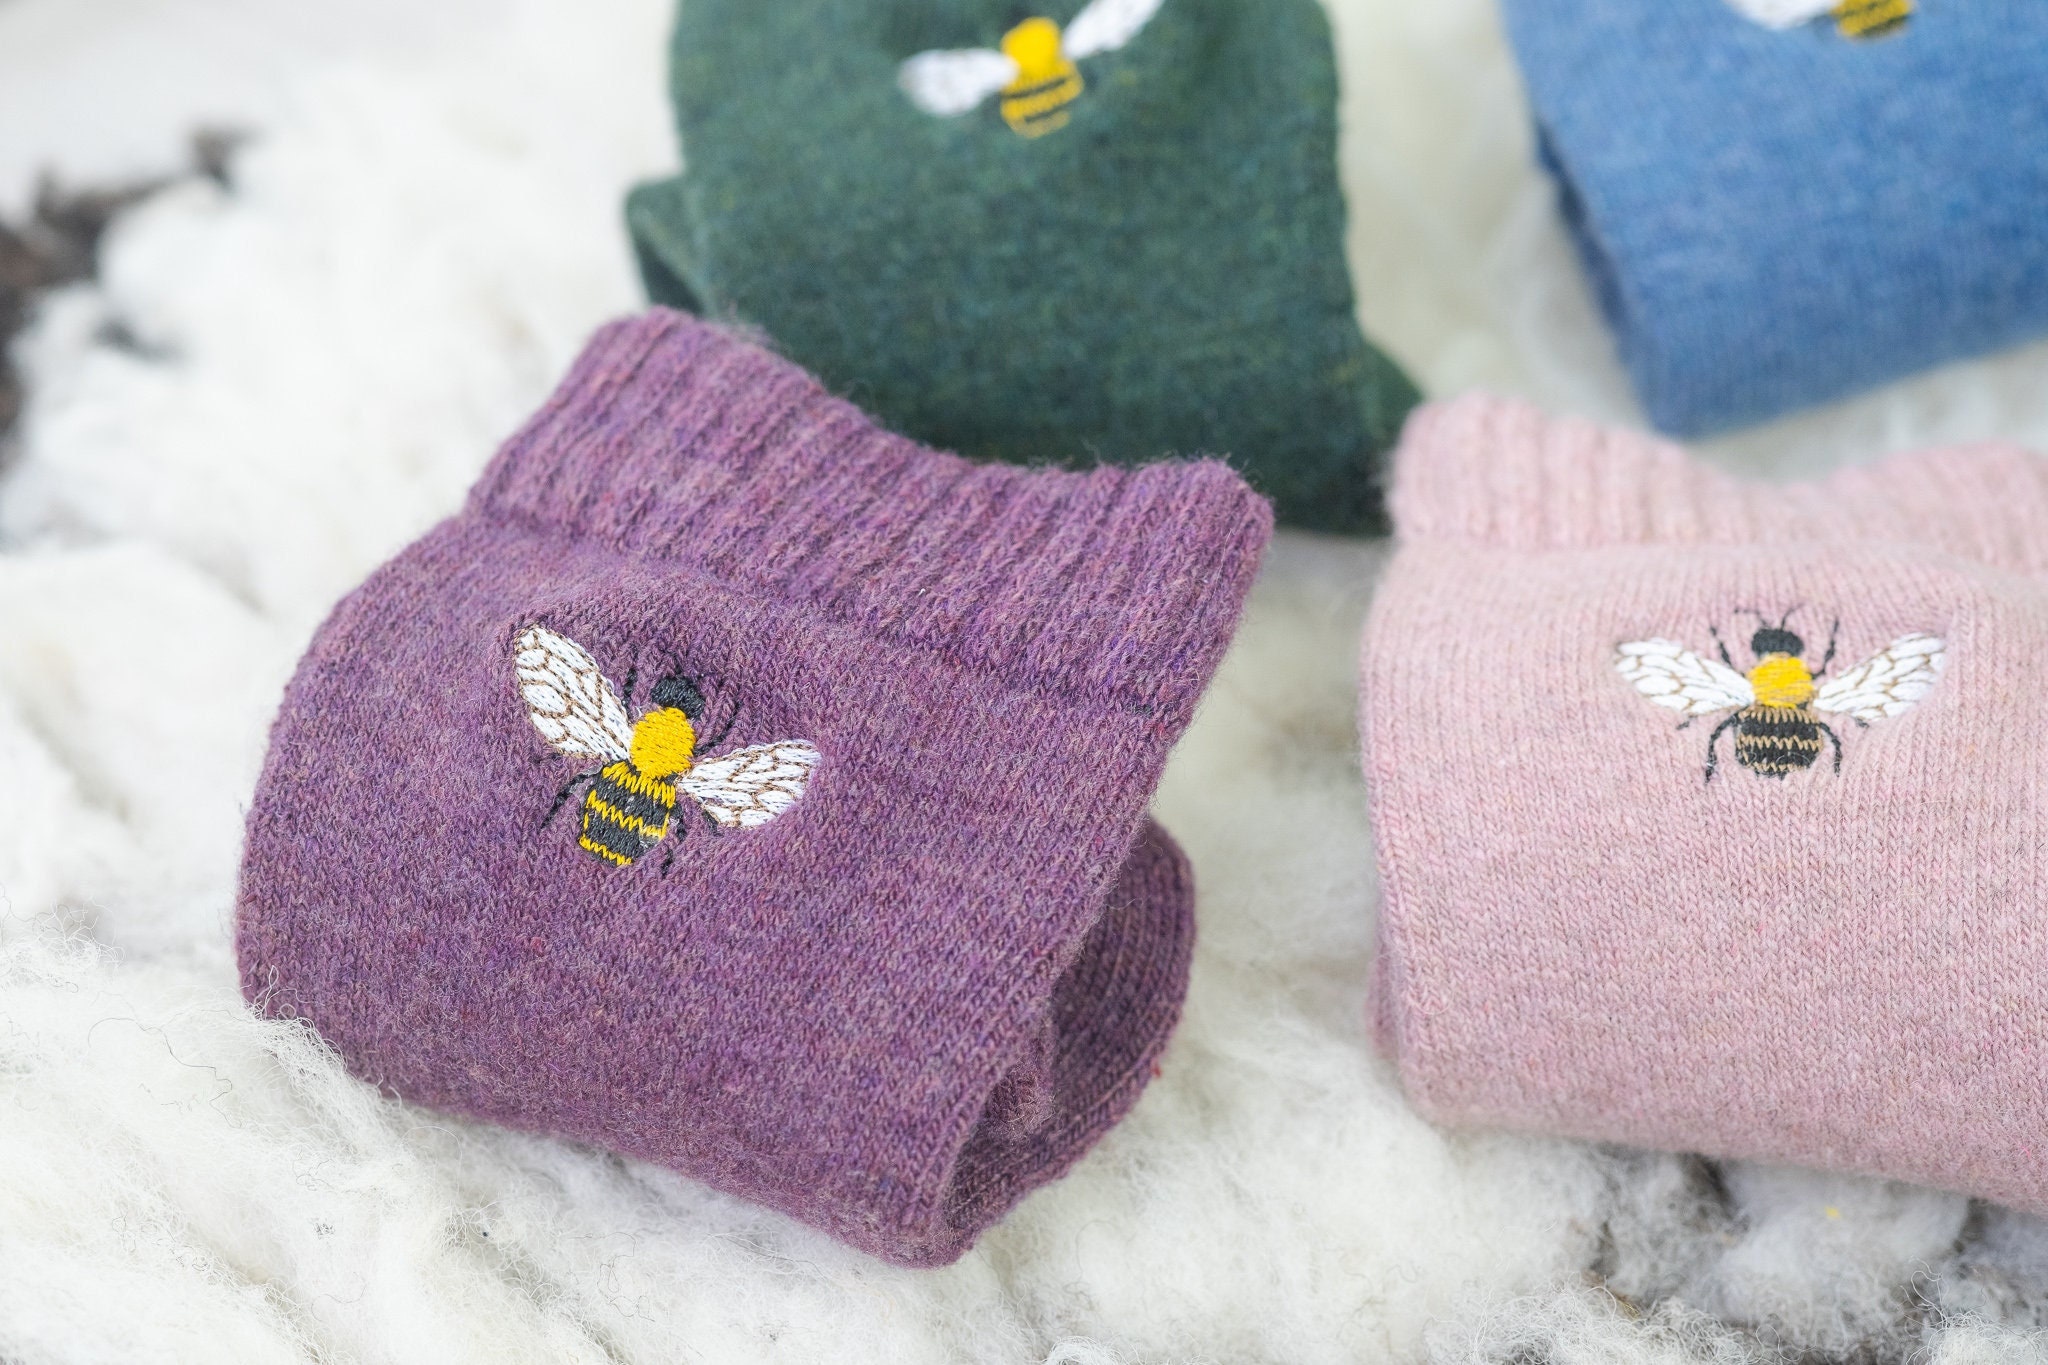 Bee Socks - Woollen Embroidered Custom Design Winter Casual Warm Unisex Cozy House Bed Great Gift Idea For Christmas, Secret Santa